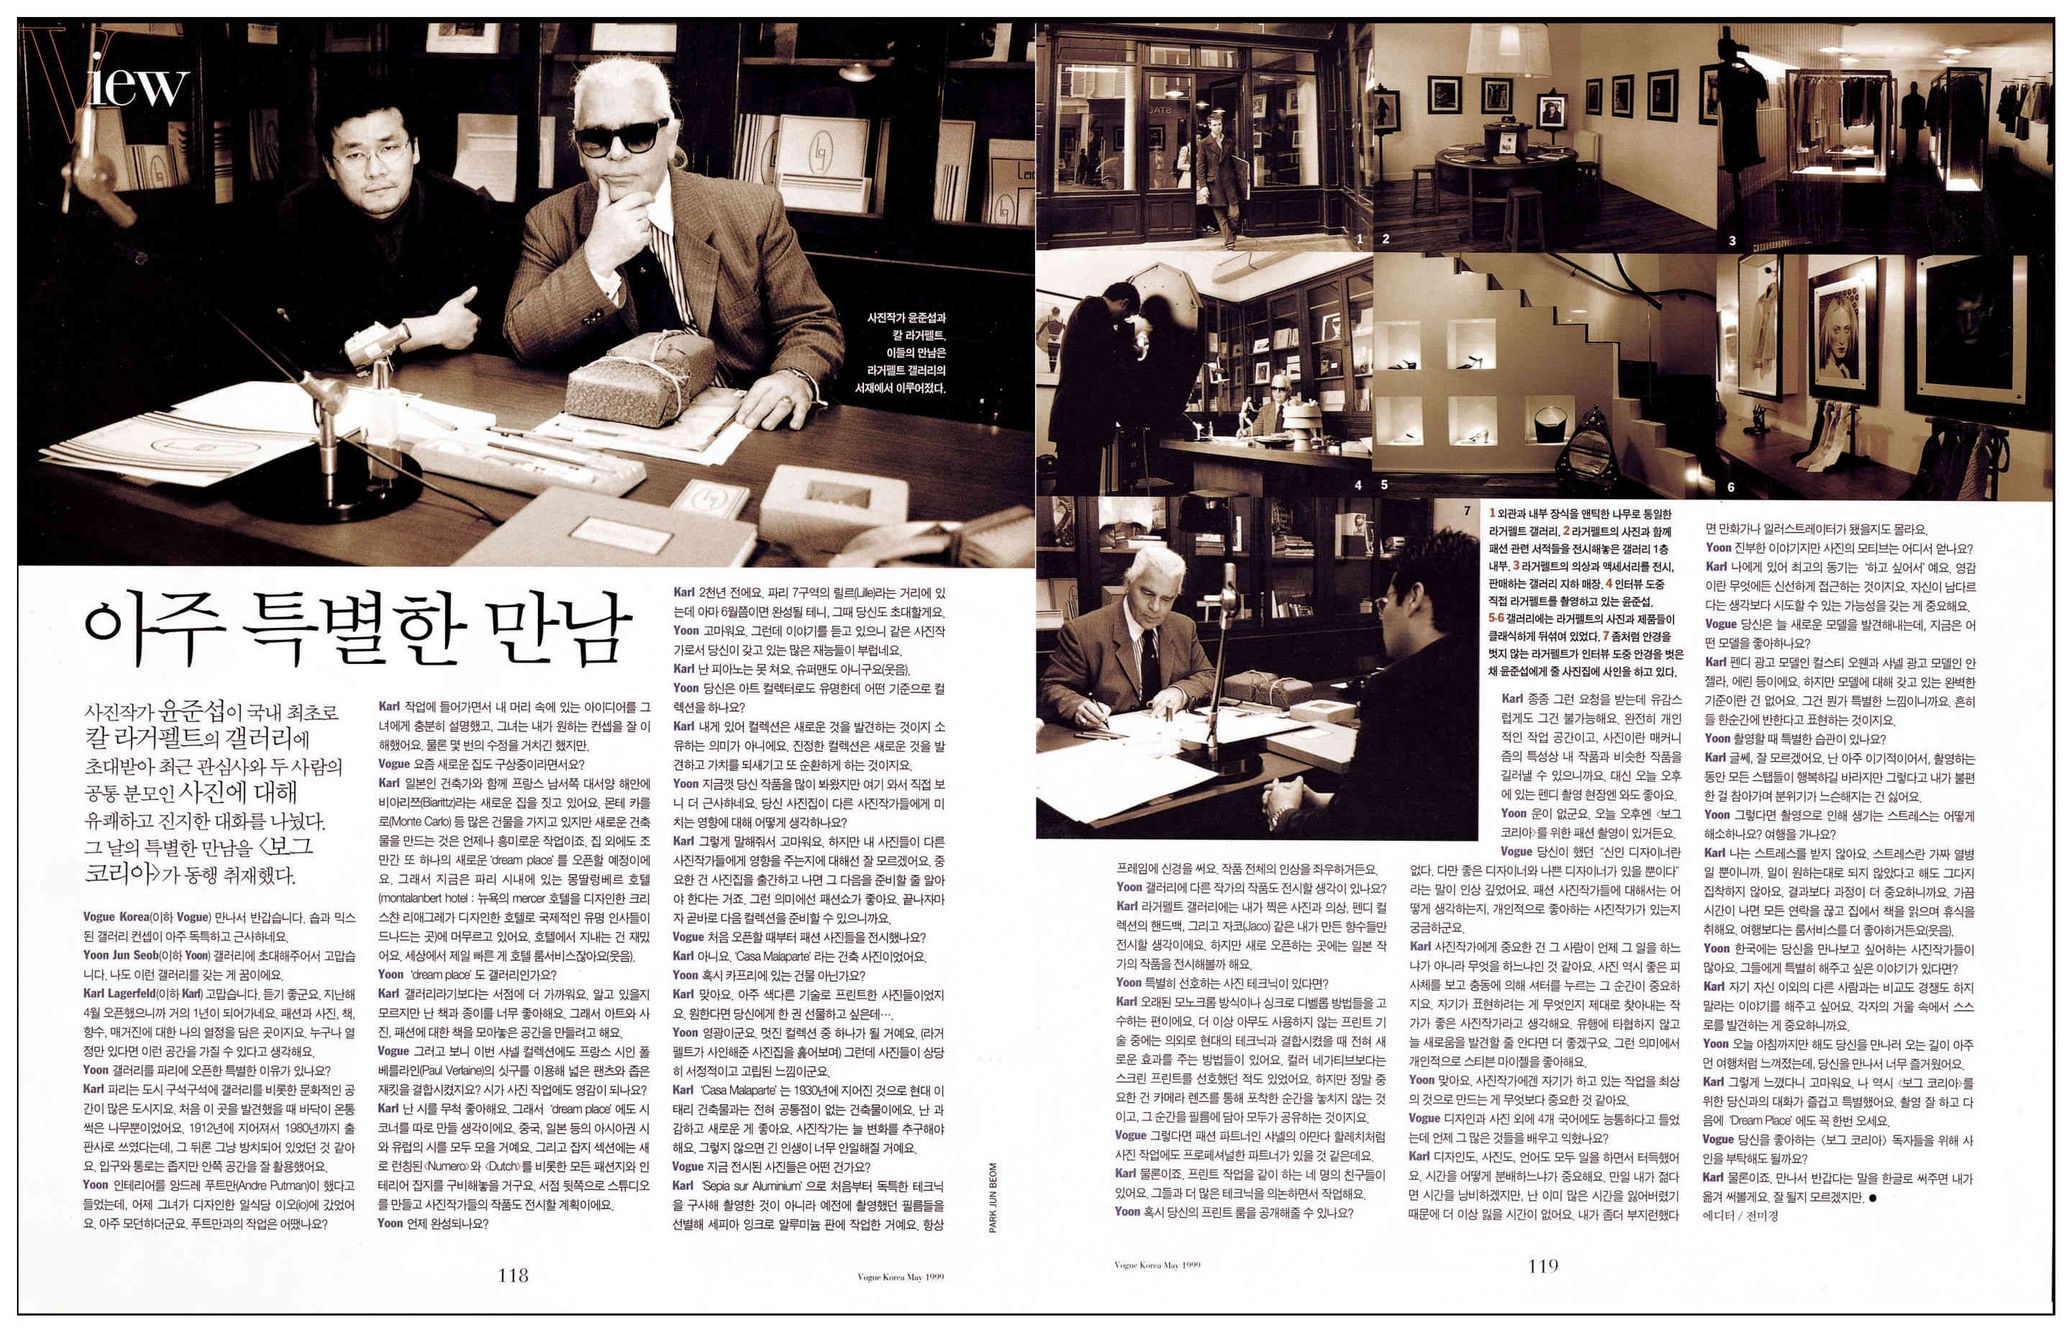 Karl Lagerfeld with Junseob Yoon (Vogue),